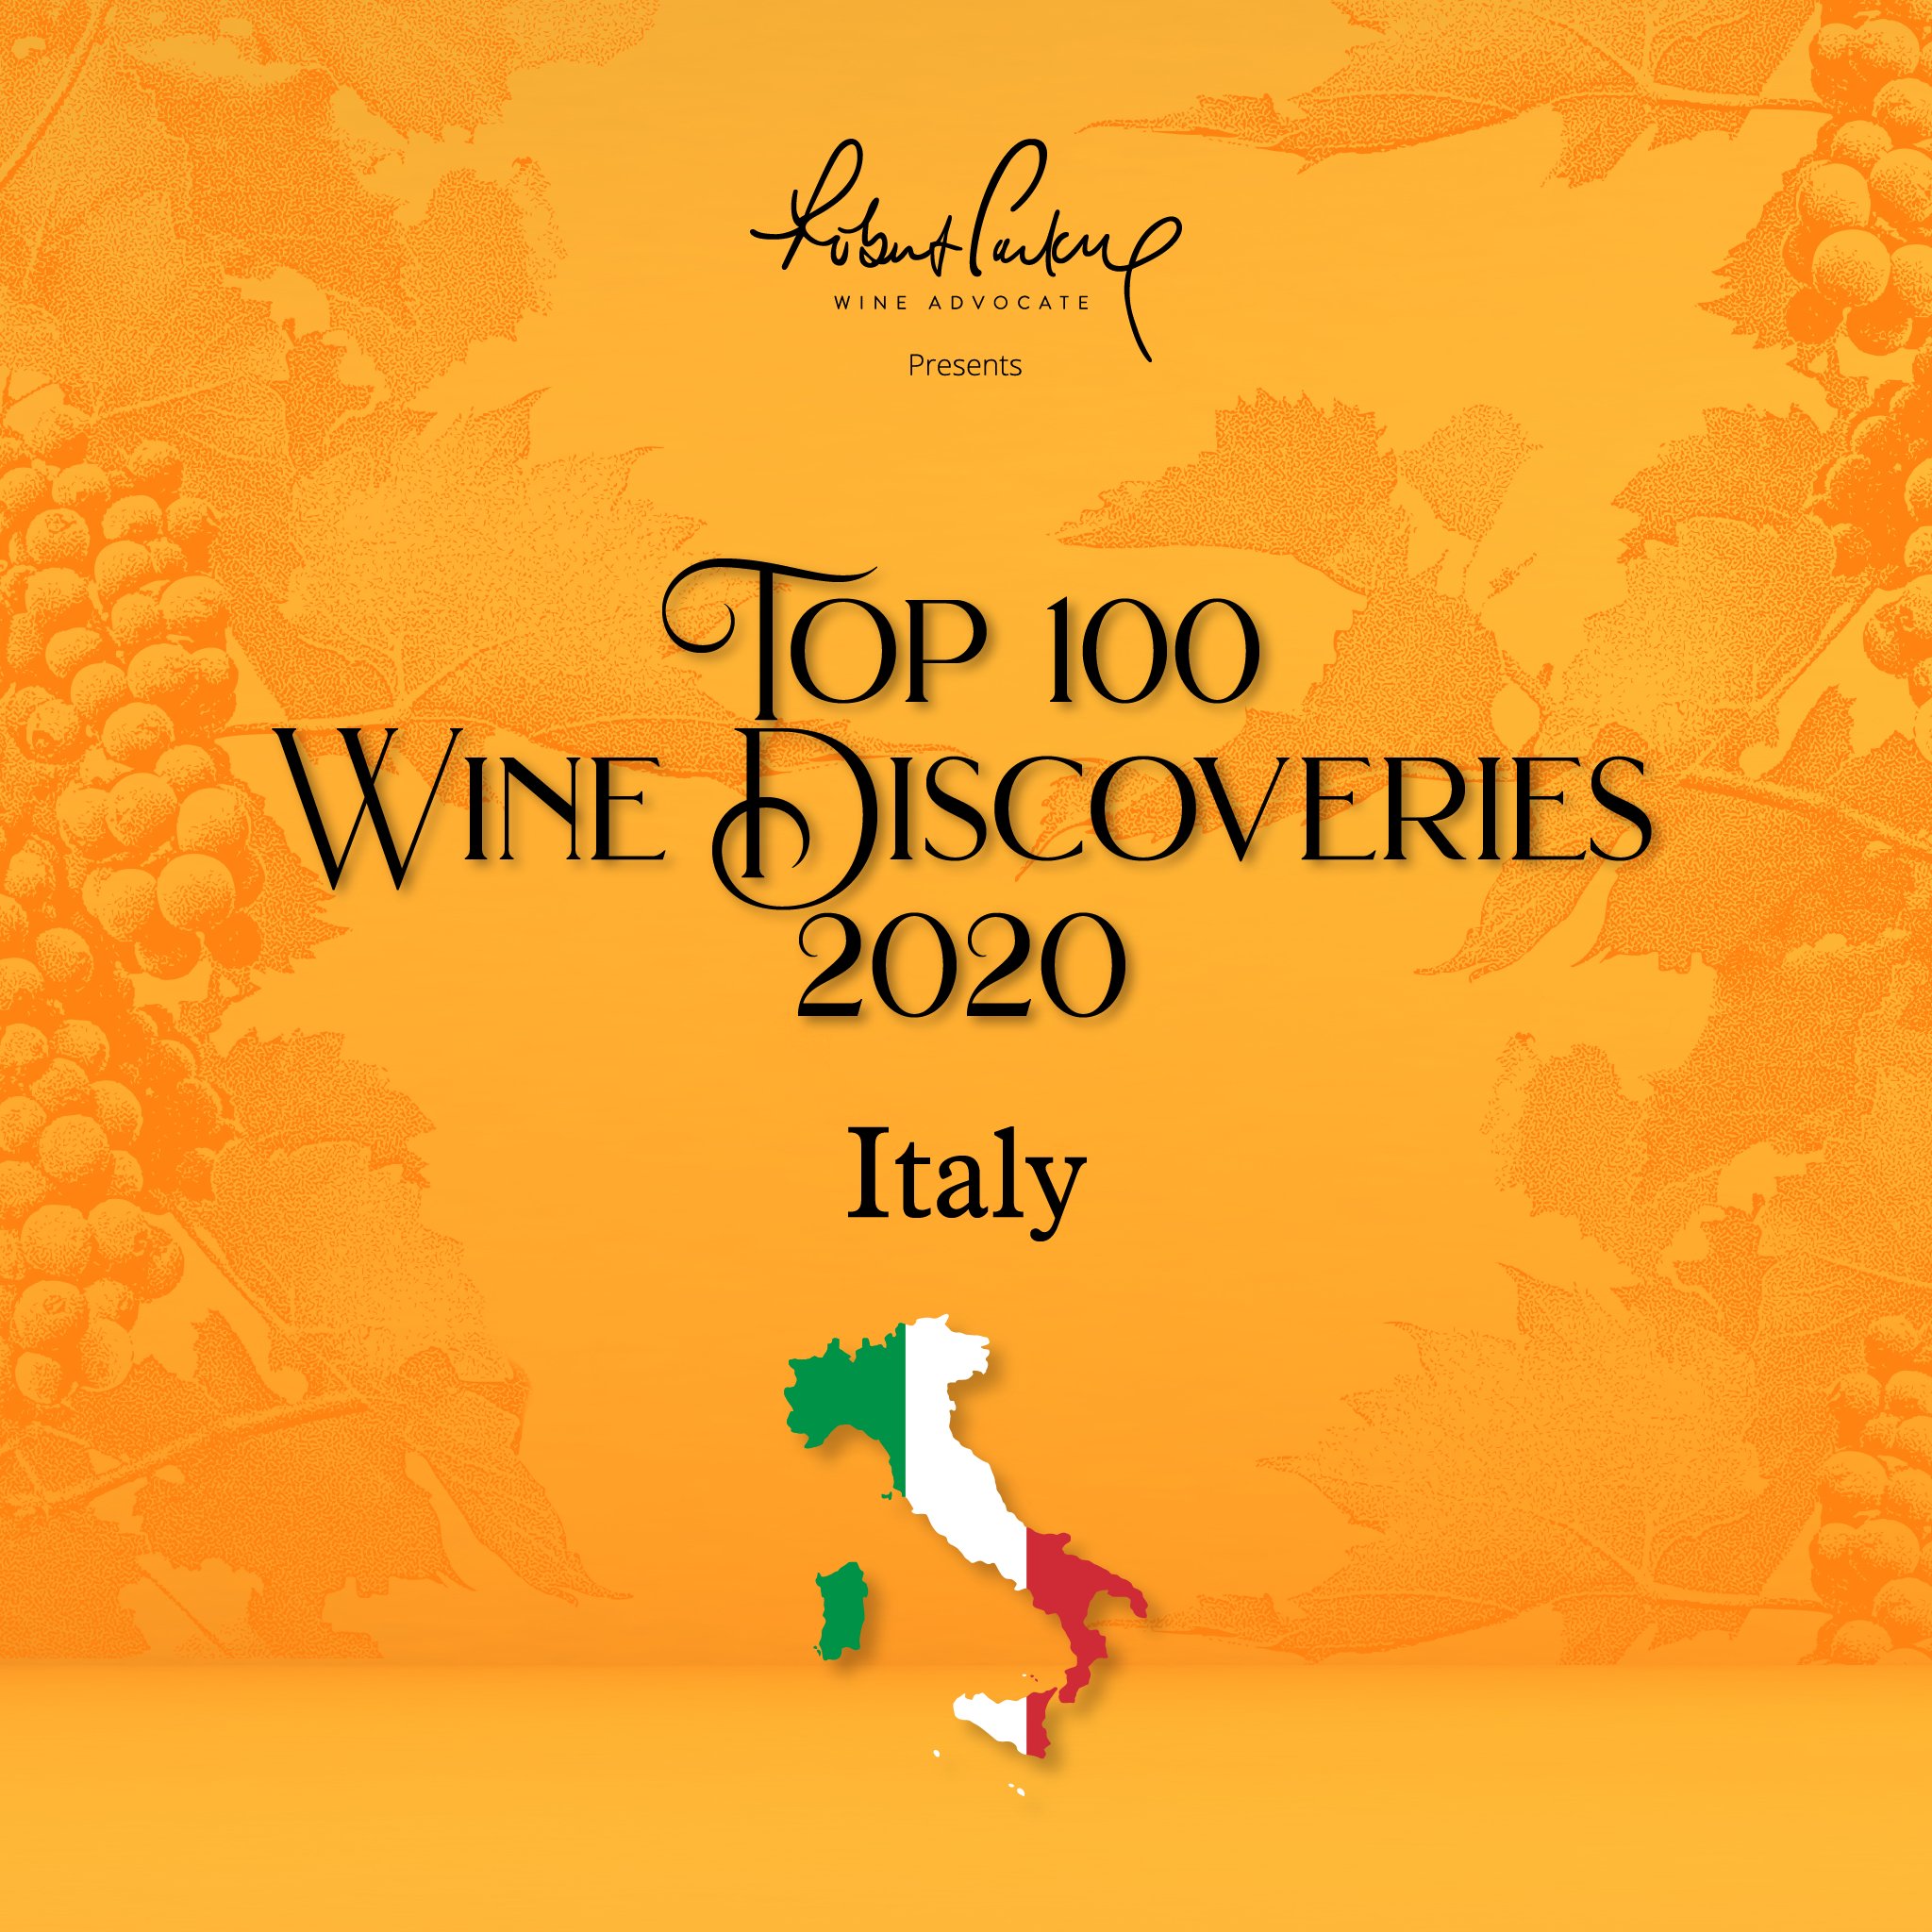 Parker Wine Advocate on Twitter: "FREE TO VIEW: Top 100 Wine Discoveries 2020 Italy 🇮🇹 Congratulations to all the wineries and winemakers selected 🎉 🥂 👏 Full selection and more